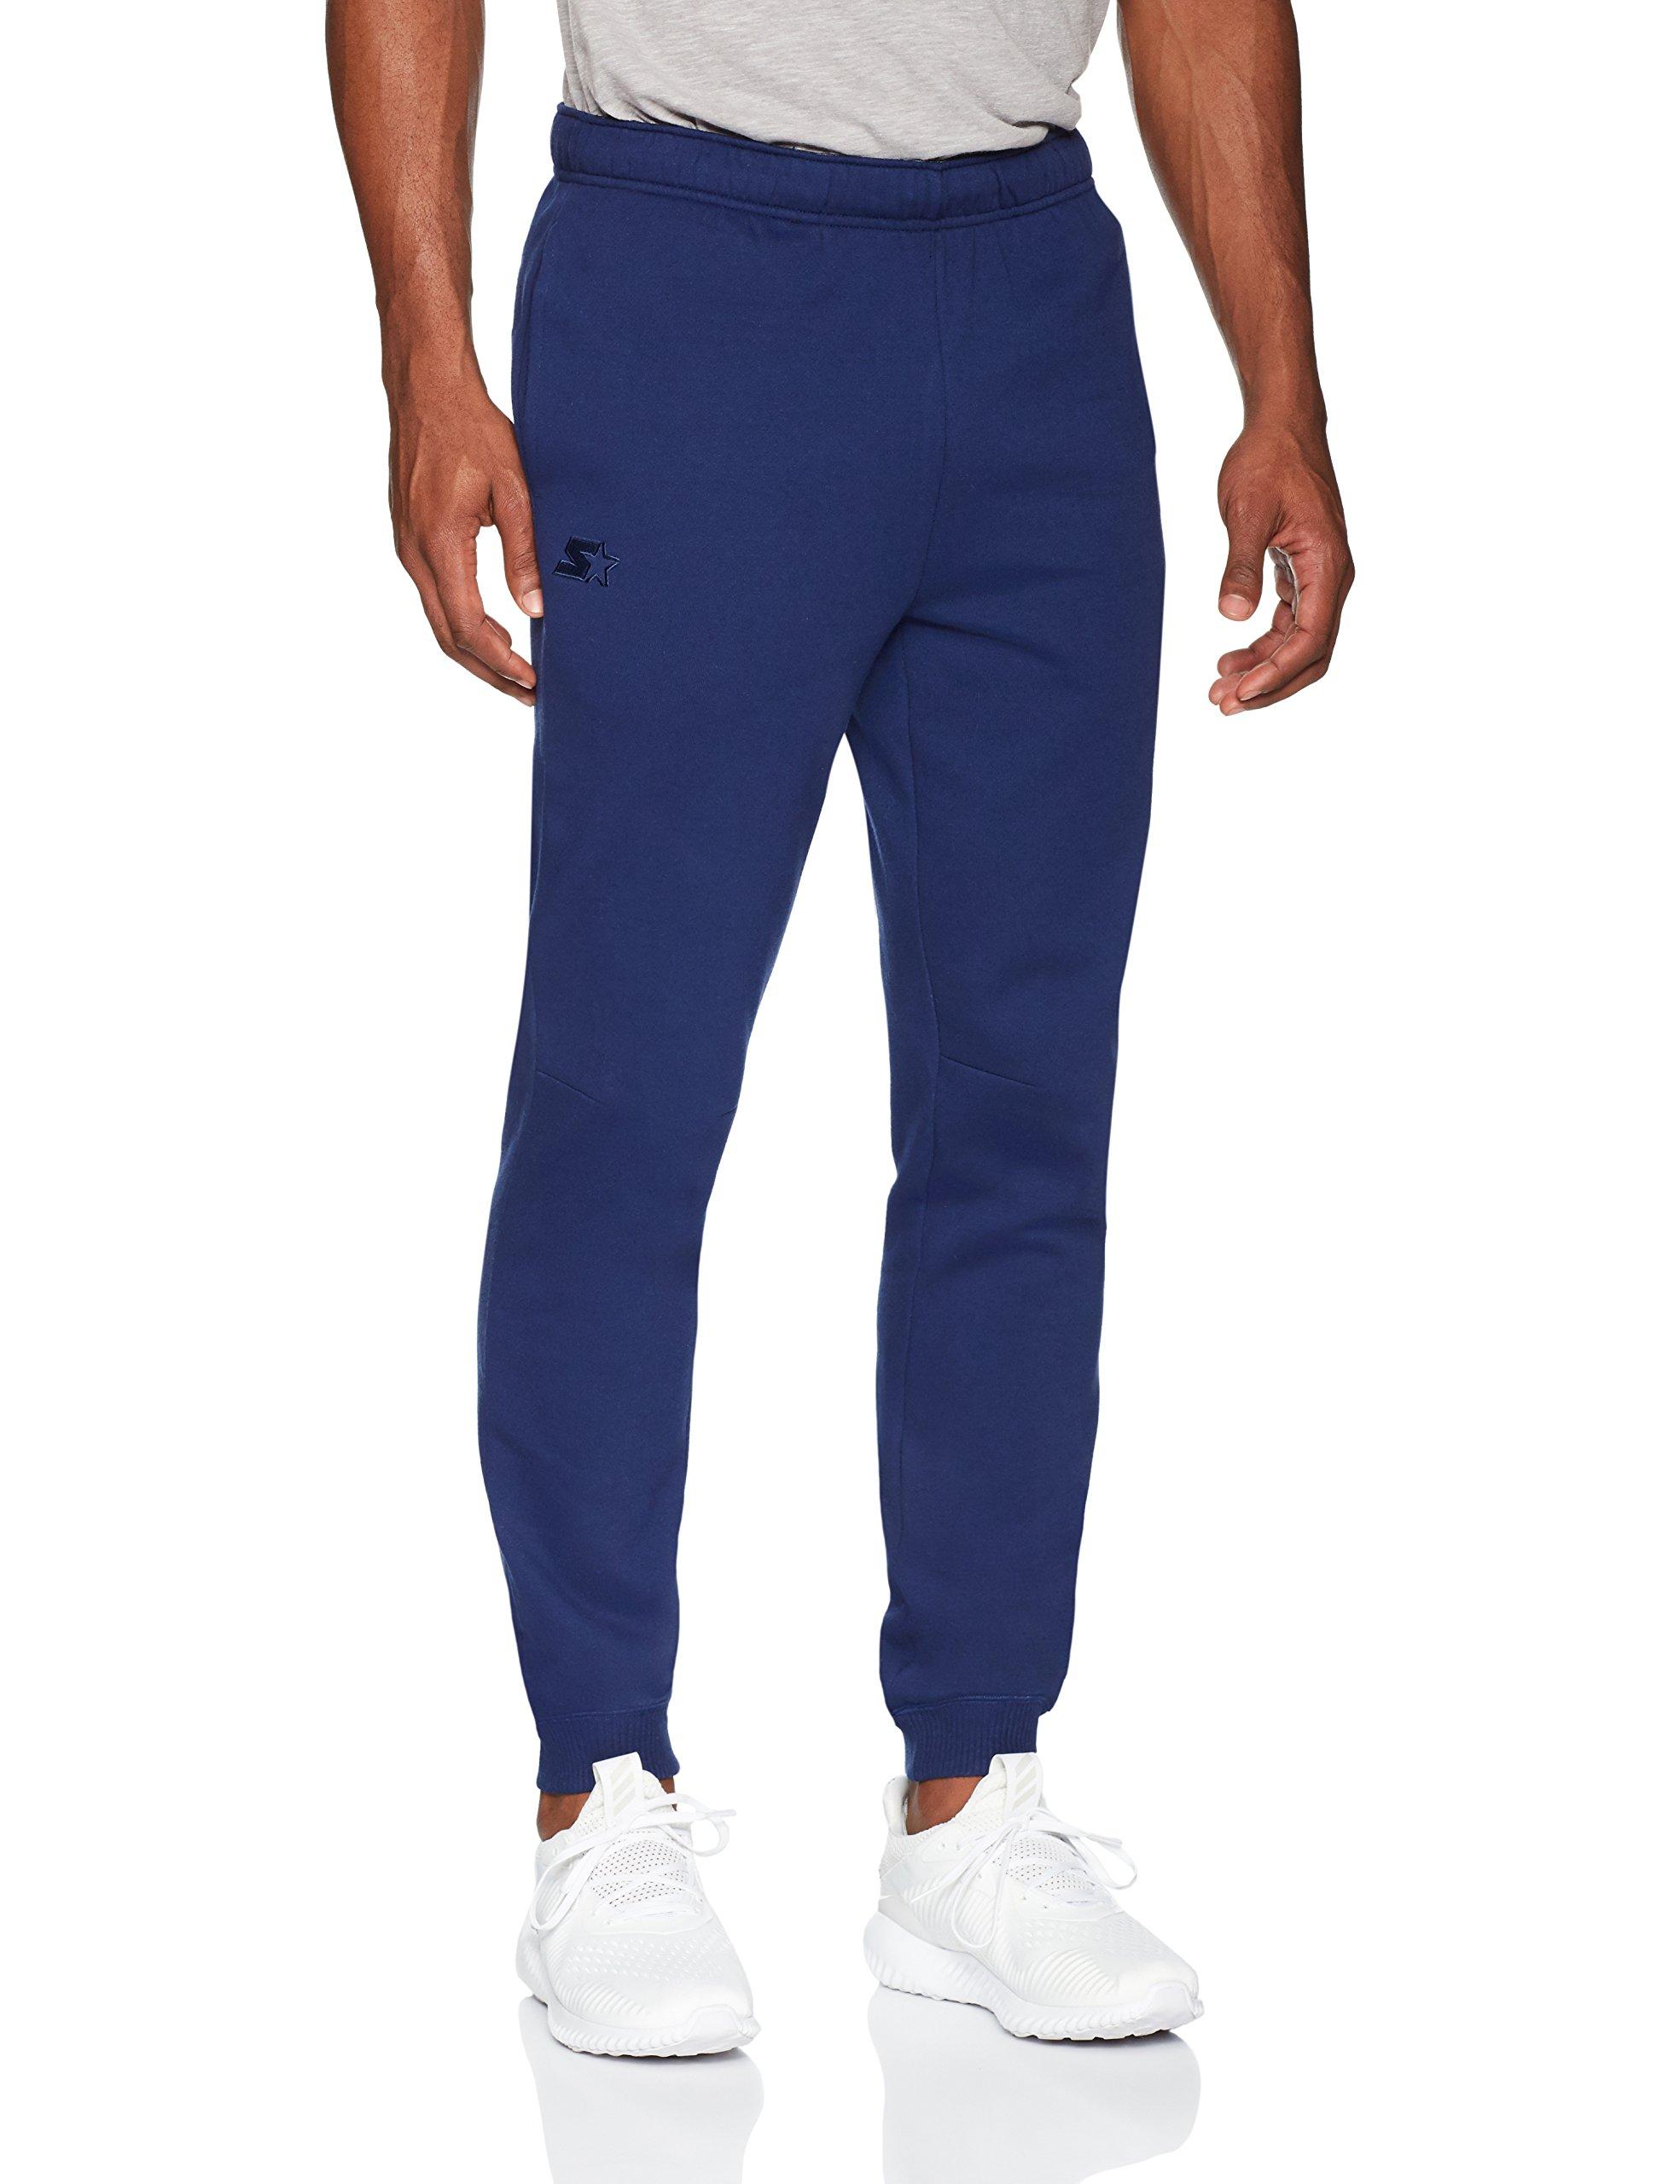 Starter Fleece Jogger Sweatpants With Pockets, Amazon Exclusive in Blue ...